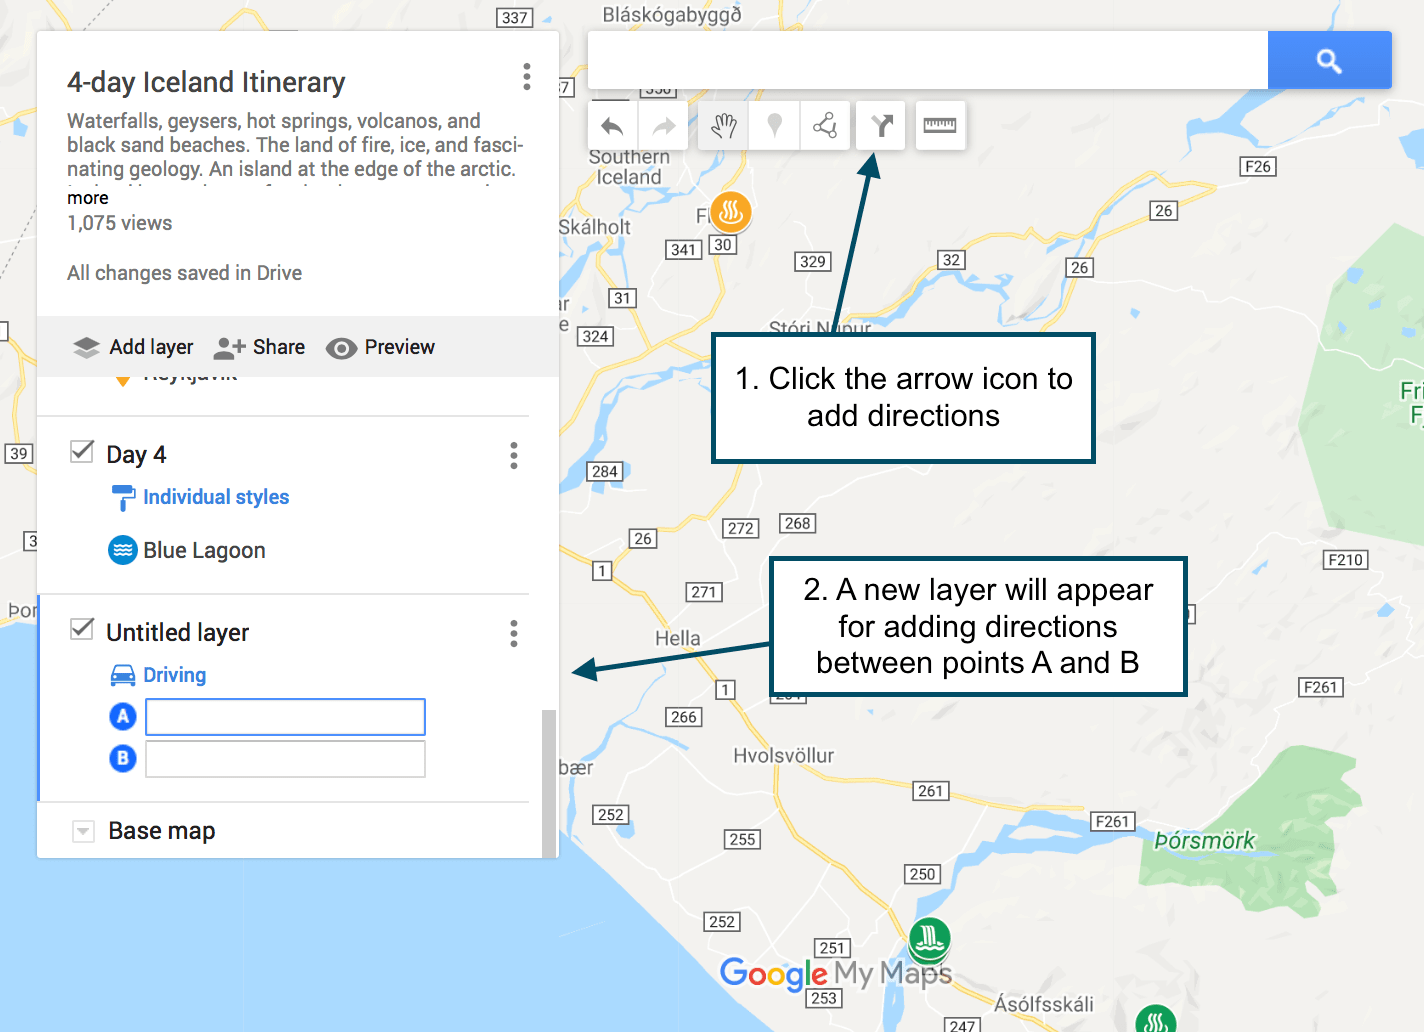 How to add directions to plan your road trip with Google Maps